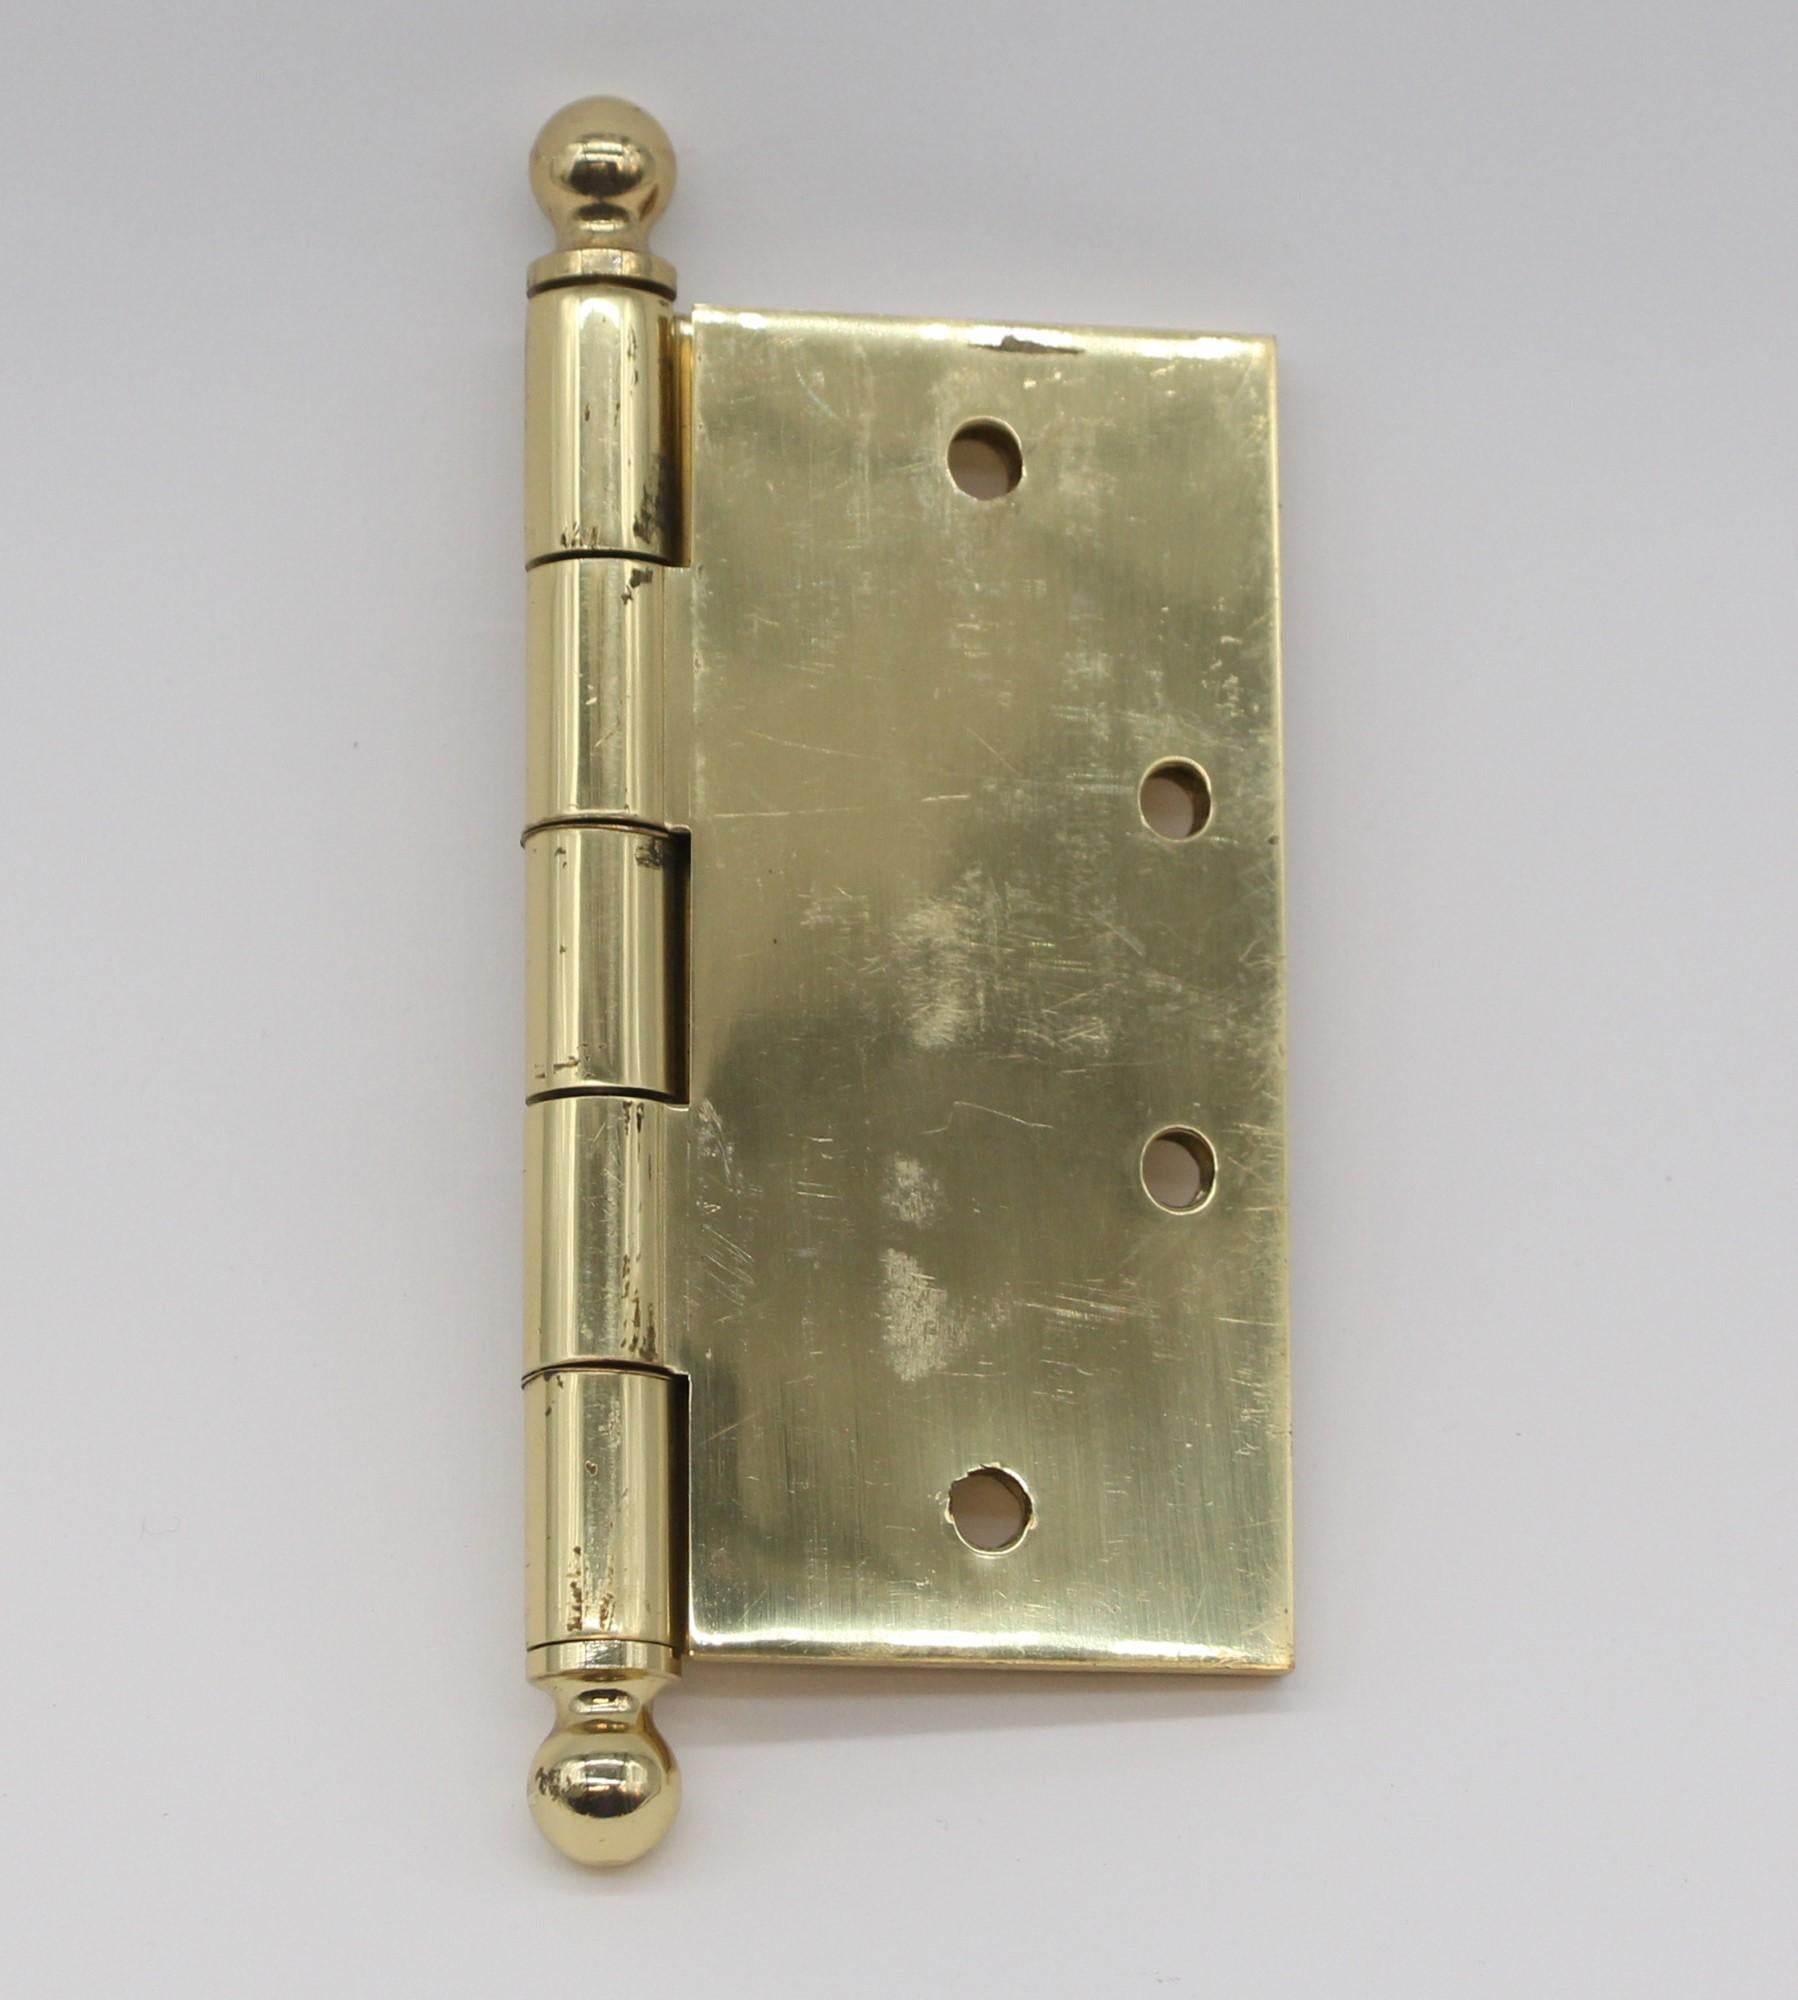 Baldwin vintage polished brass butt door hinge, 4.5 x 4.5. Has five knuckles, with a staggered hole pattern, and flat tips. Small qty. available at time of posting. Priced each. Please inquire. Please note, this item is located in our Scranton, PA